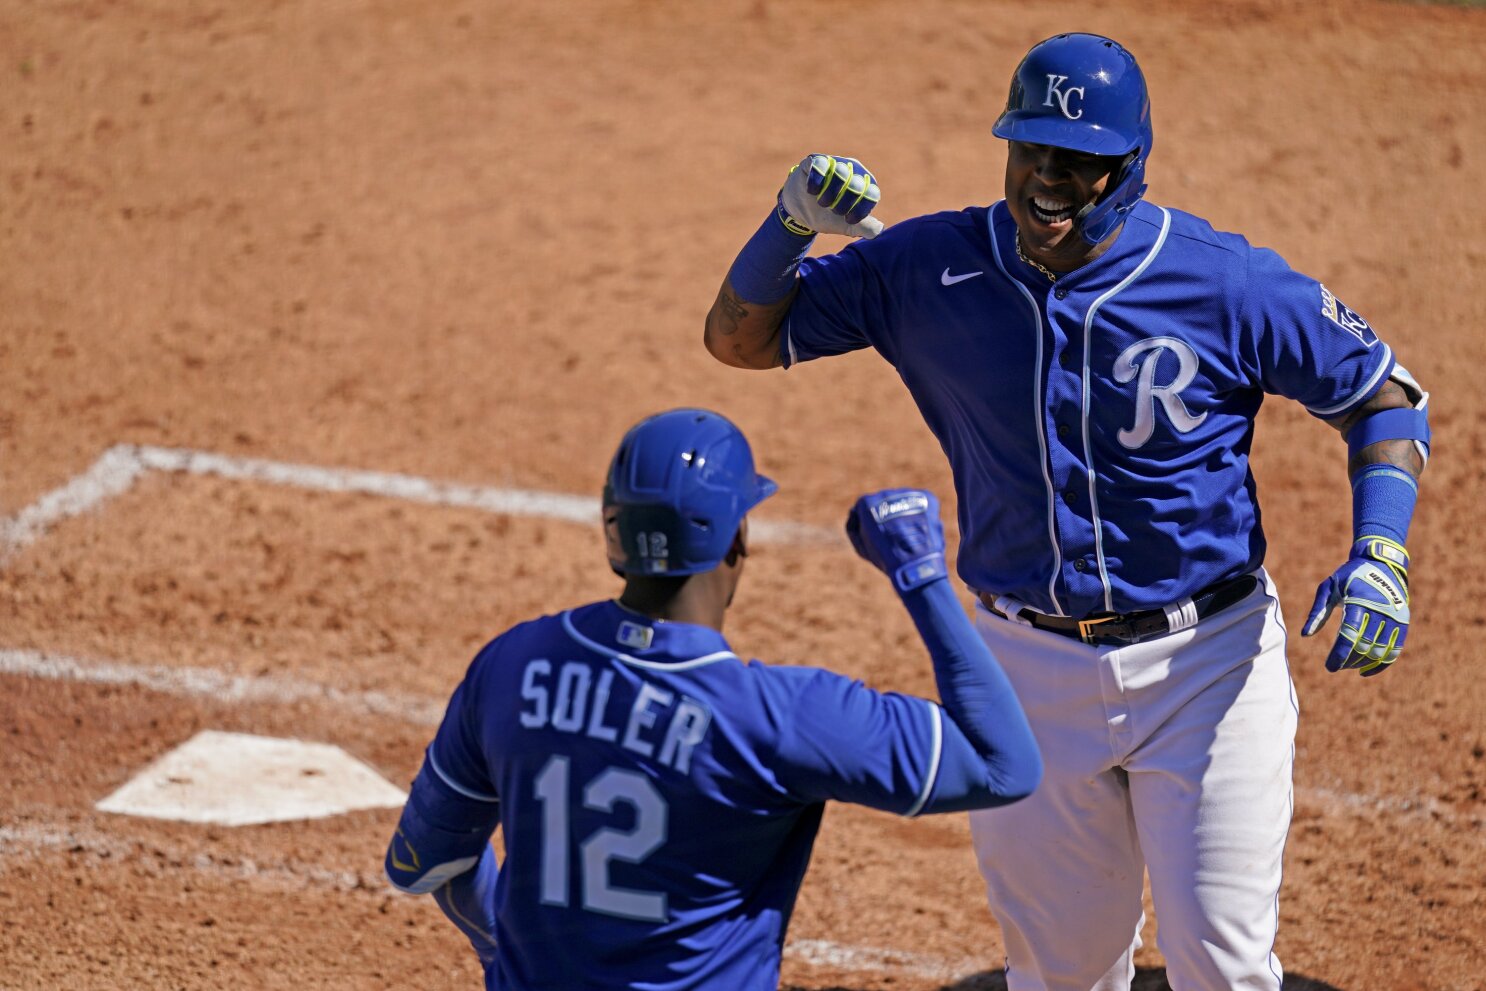 Kansas City Royals 2016 Opening Day Gold Jersey worn by Salvador Perez